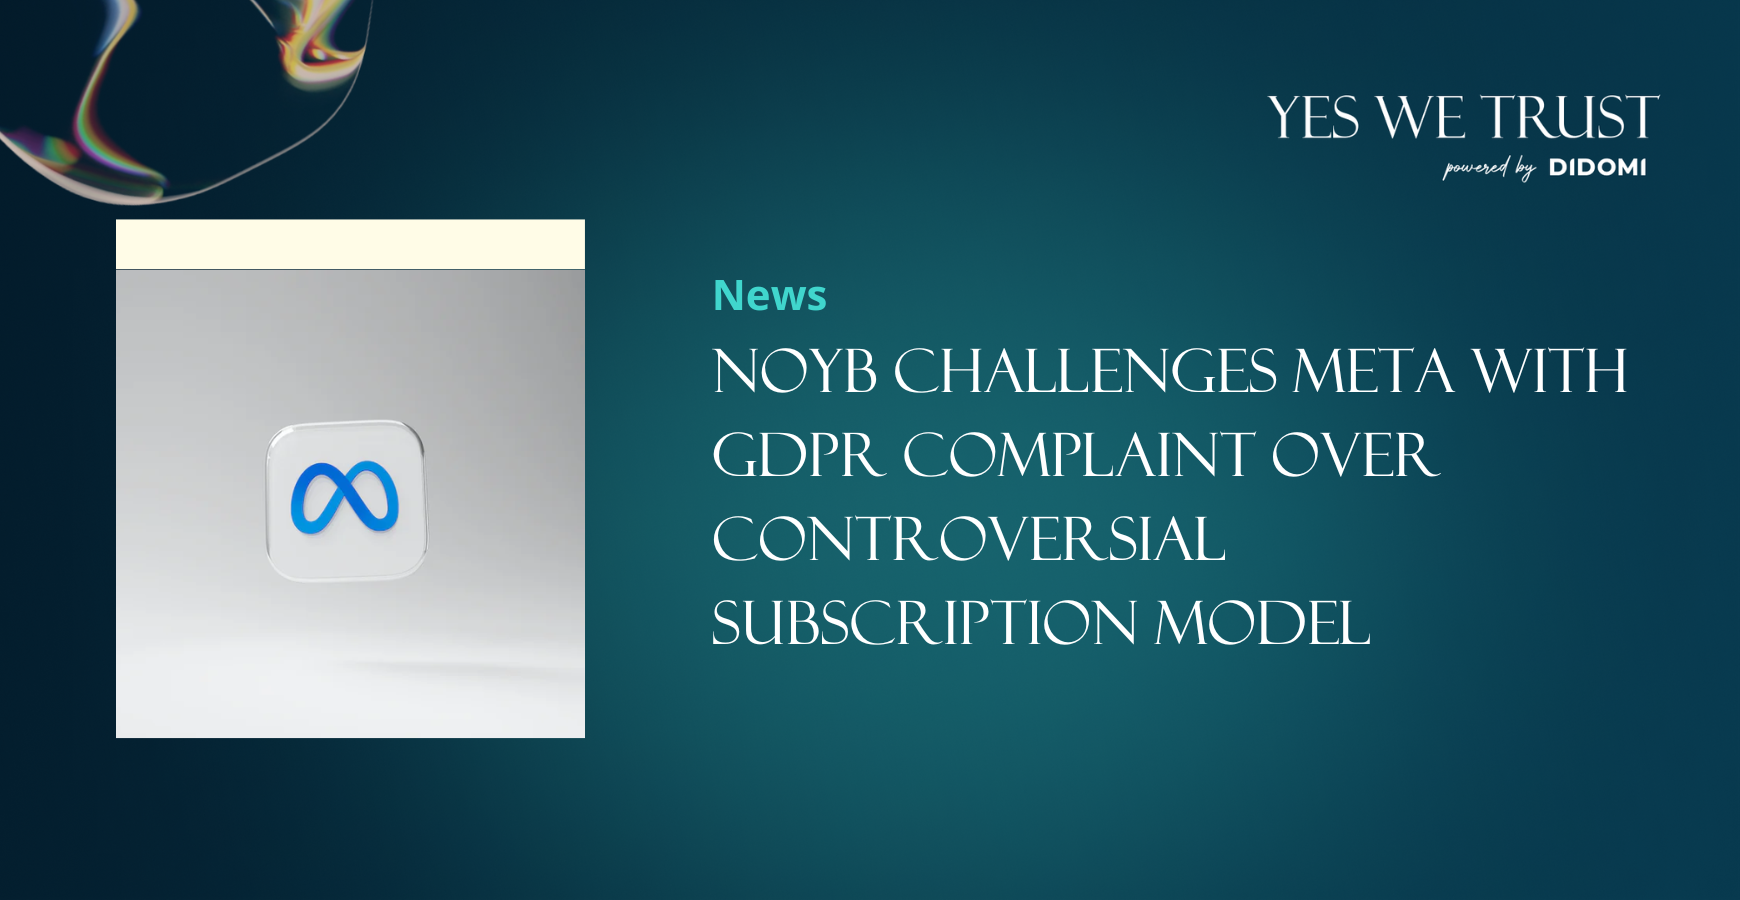 NOYB challenges Meta with GDPR complaint over controversial subscription model